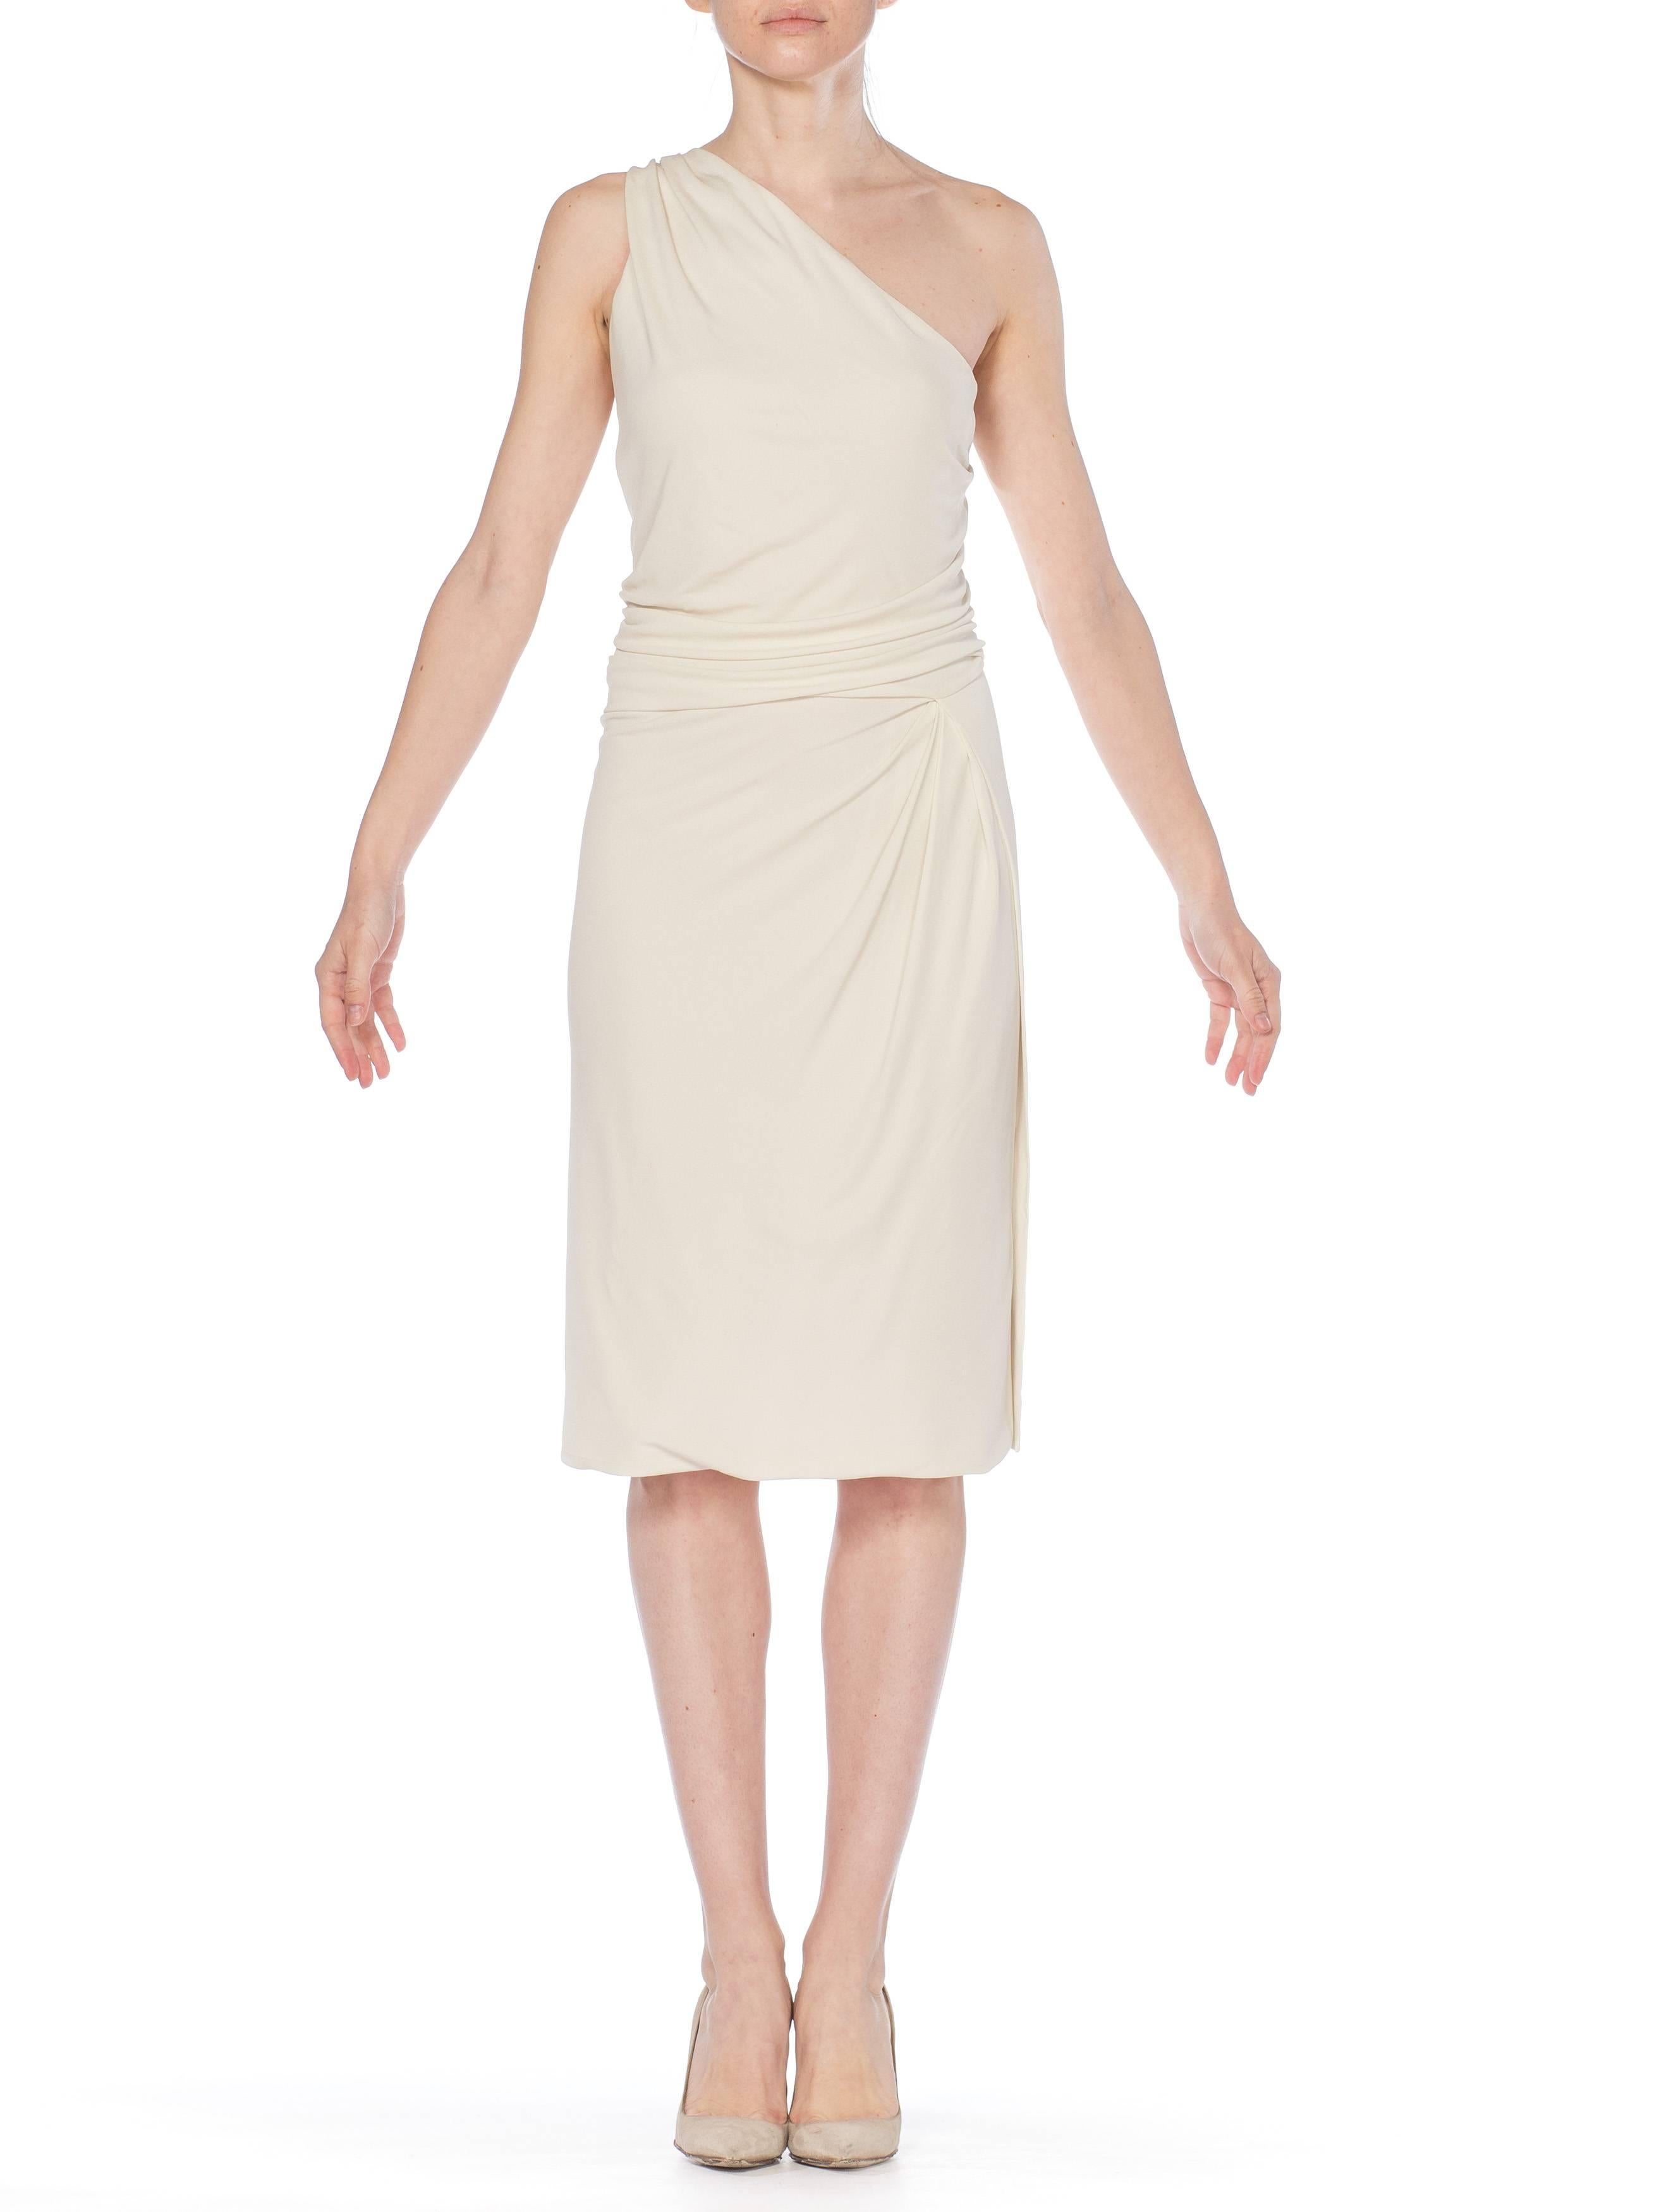 1990S TOM FORD GUCCI White Slinky Viscose Jersey One Shoulder Cocktail Dress Wi 10